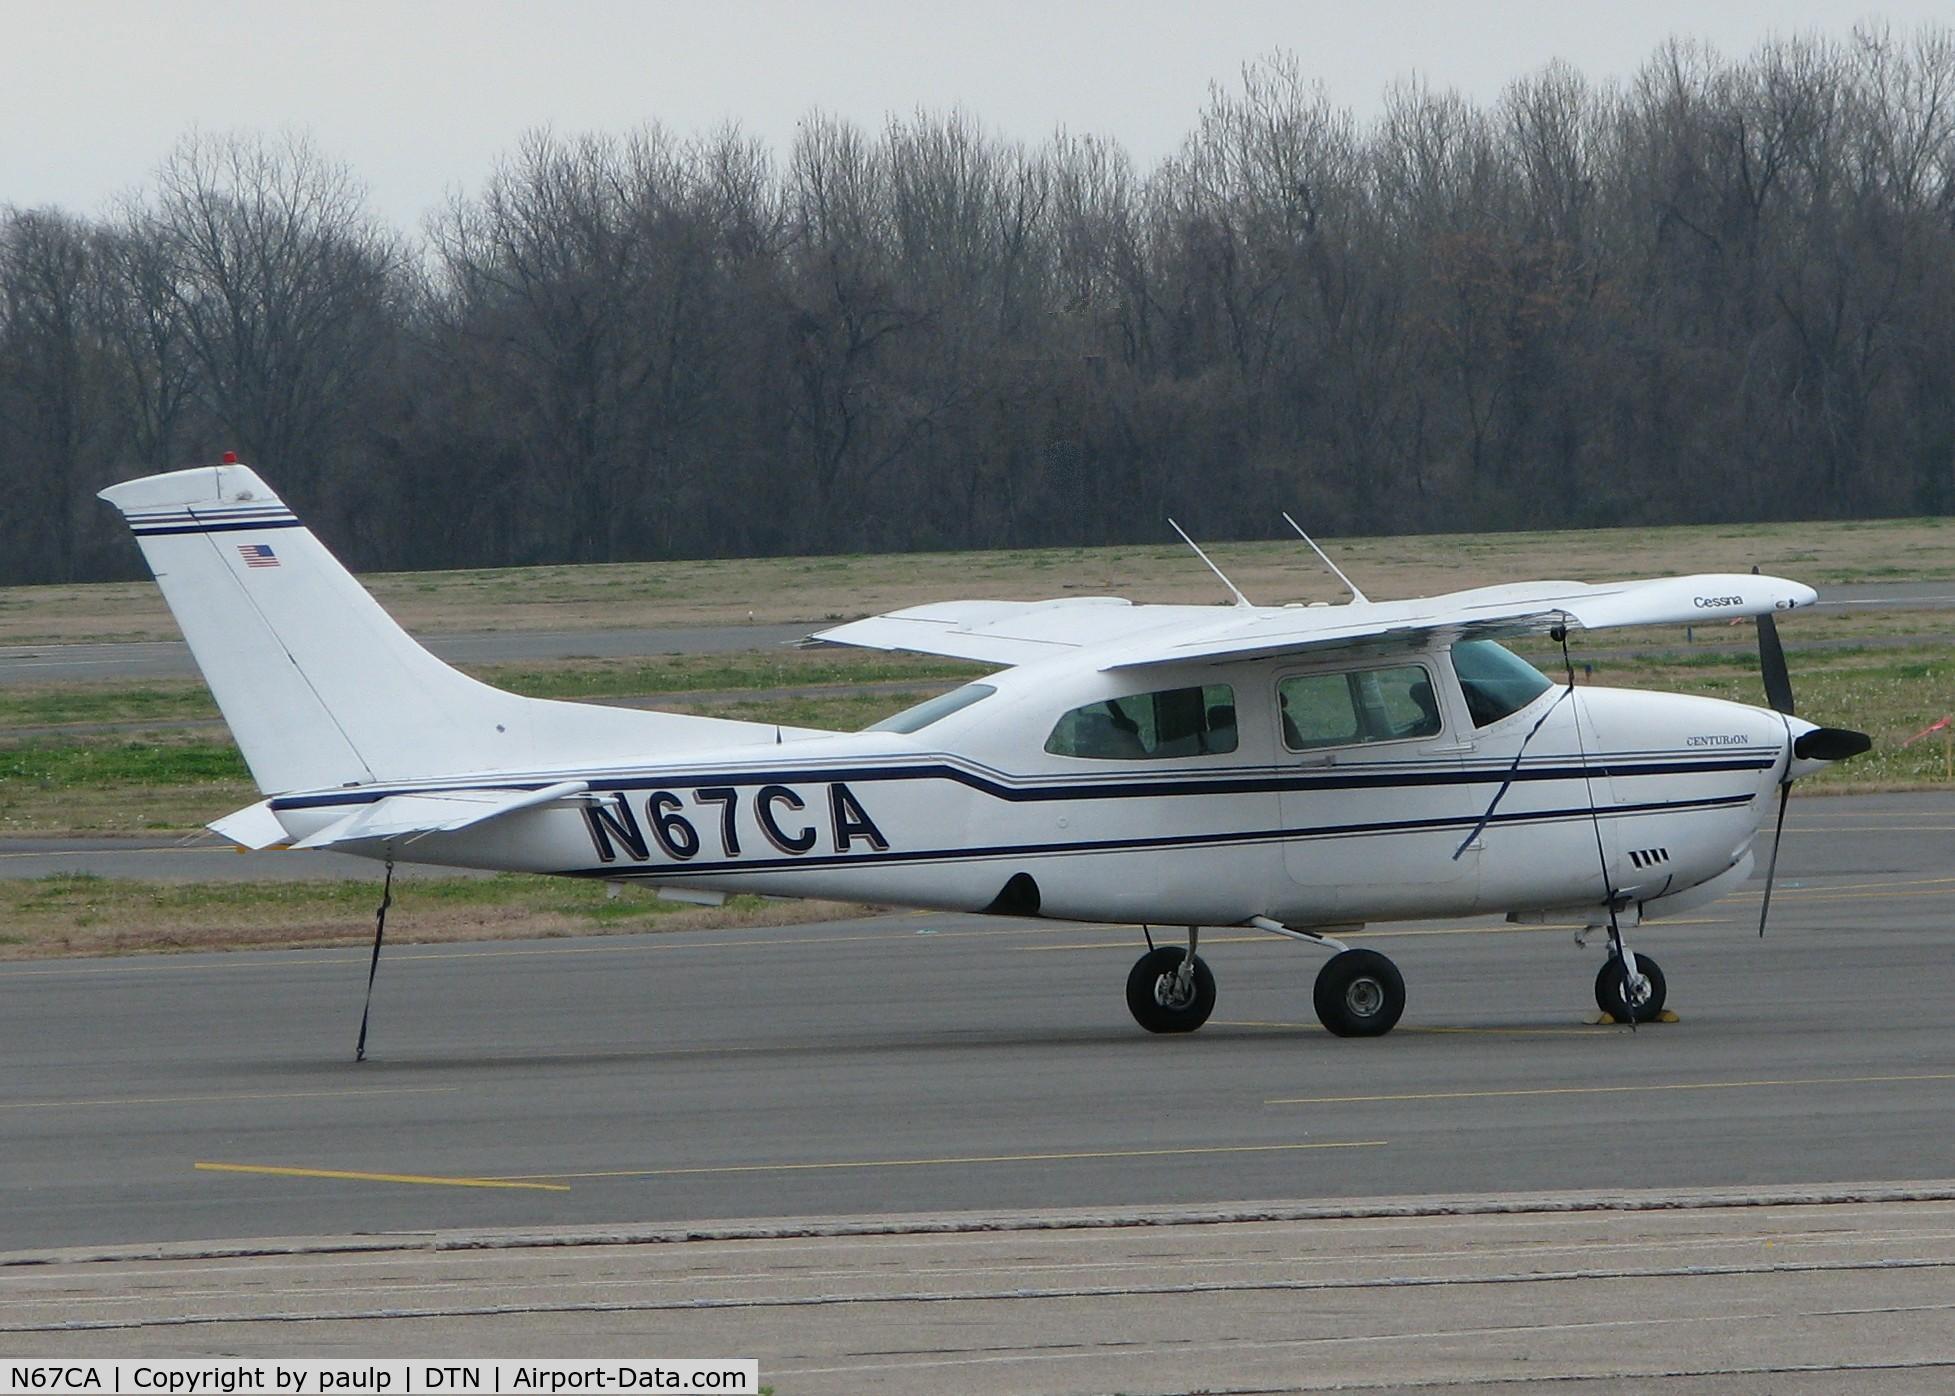 N67CA, 1981 Cessna 210N Centurion C/N 21064479, Parked at the Shreveport Downtown airport.